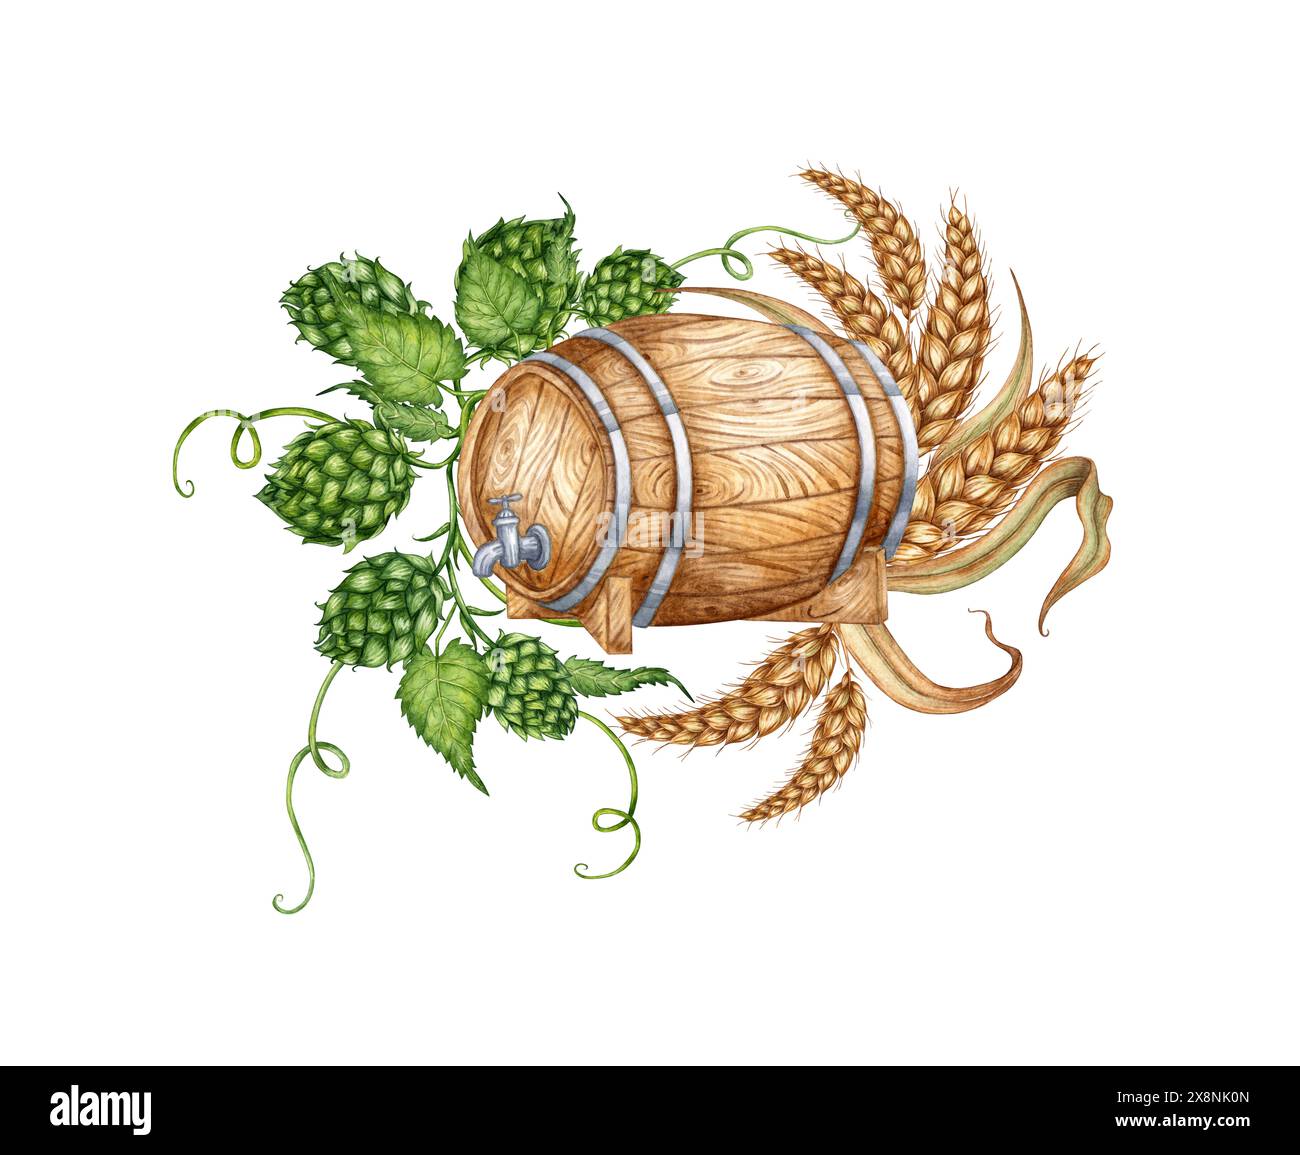 Wooden barrel with hops, ears of wheat for beer and other alcoholic drinks watercolor illustration. Isolated from the background. Suitable for interio Stock Photo